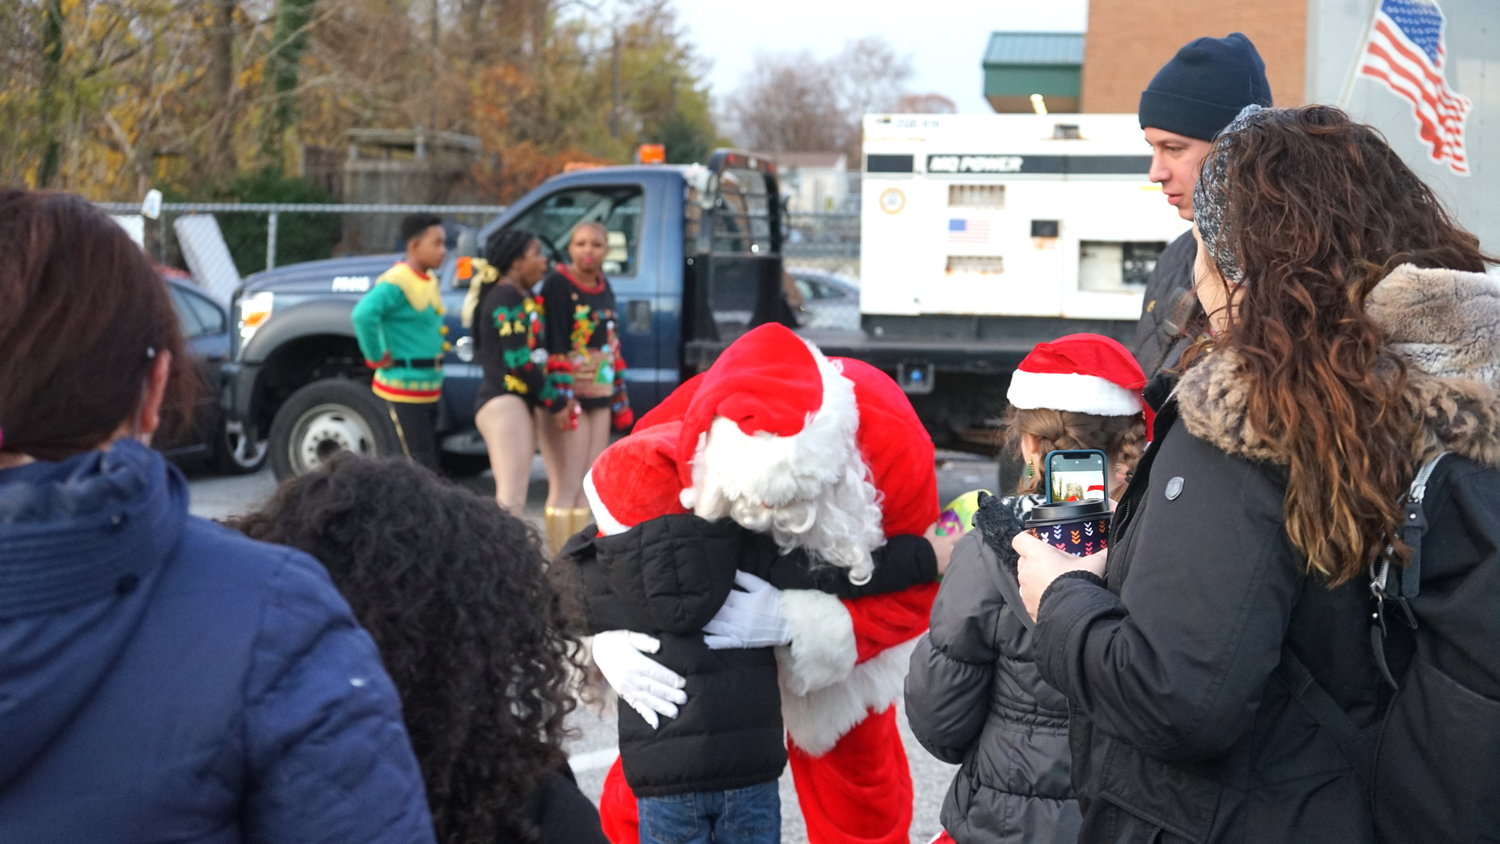 Santa Claus was quite popular at the Chamber of Commerce’s annual tree lighting Dec. 5 at the Baldwin Historical Society.